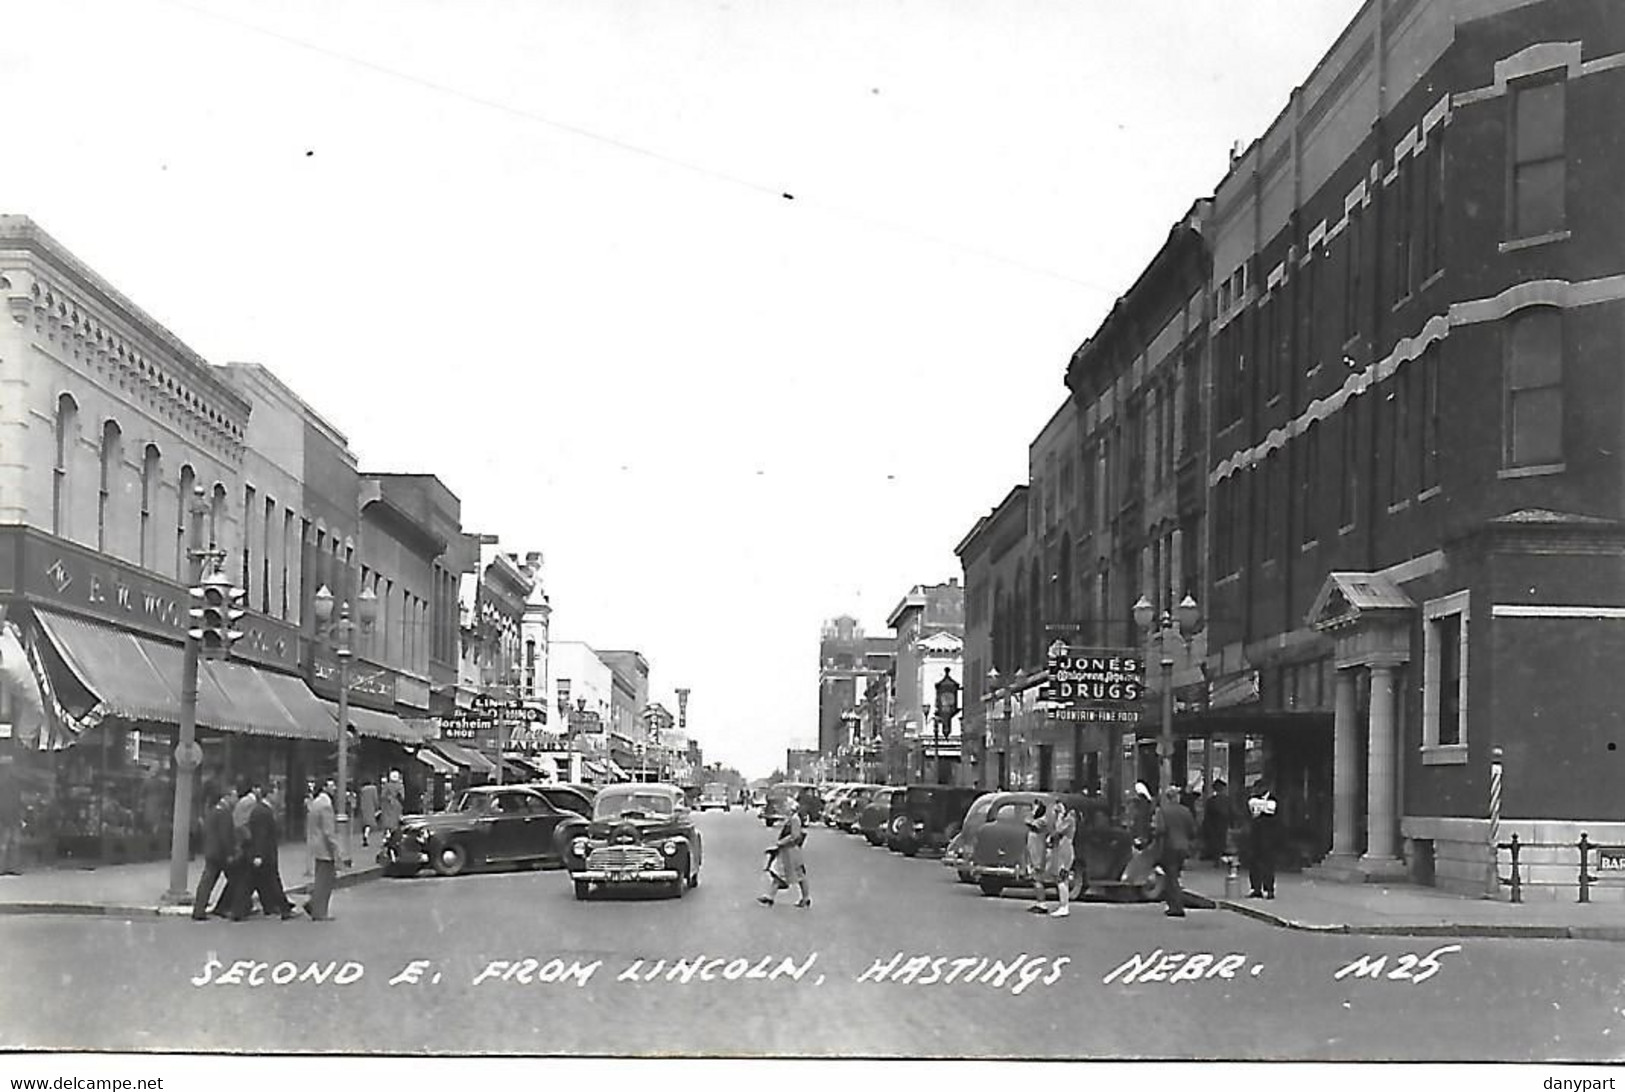 Hastings - Nebraska - Second Street - BEAUTIFUL ANIMATED POSTCARD FROM THE 50S NEVER SEEN FOR SALE - Hastings